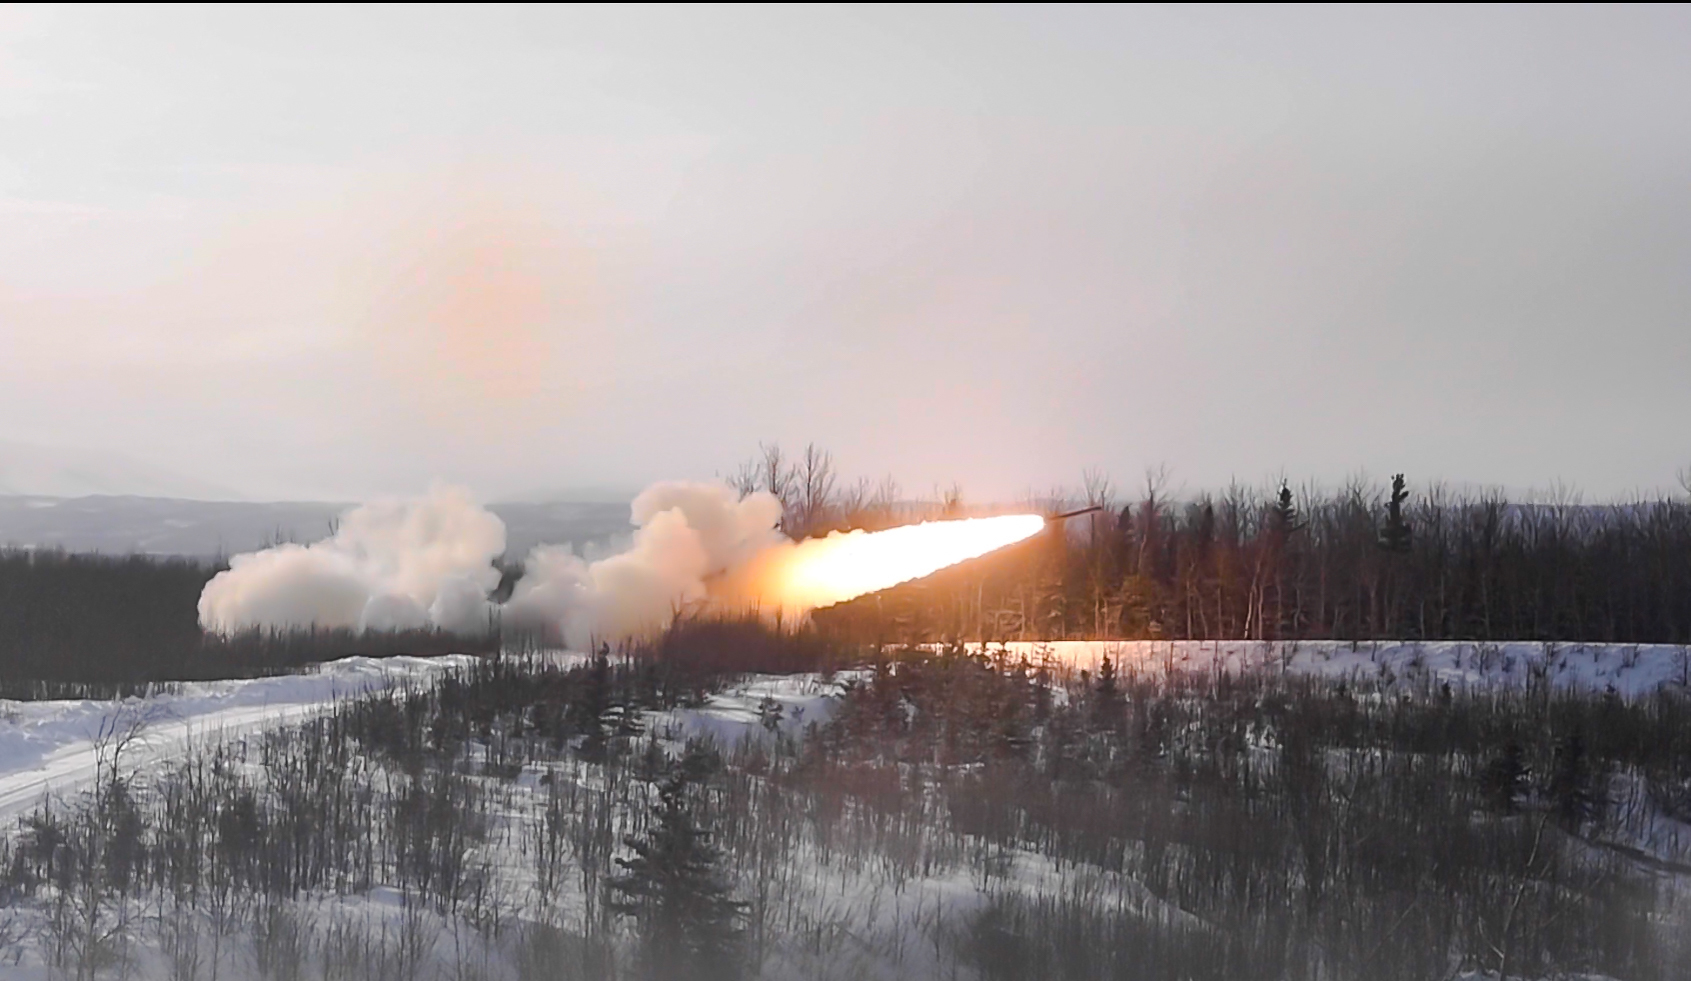 U.S. Marines shoot an M142 High Mobility Artillery Rocket System during U.S. Northern Command’s Exercise Arctic Edge in Fort Greely, Alaska, on March 3, 2020. (Staff Sgt. Diana Cossaboom/U.S. Air Force)